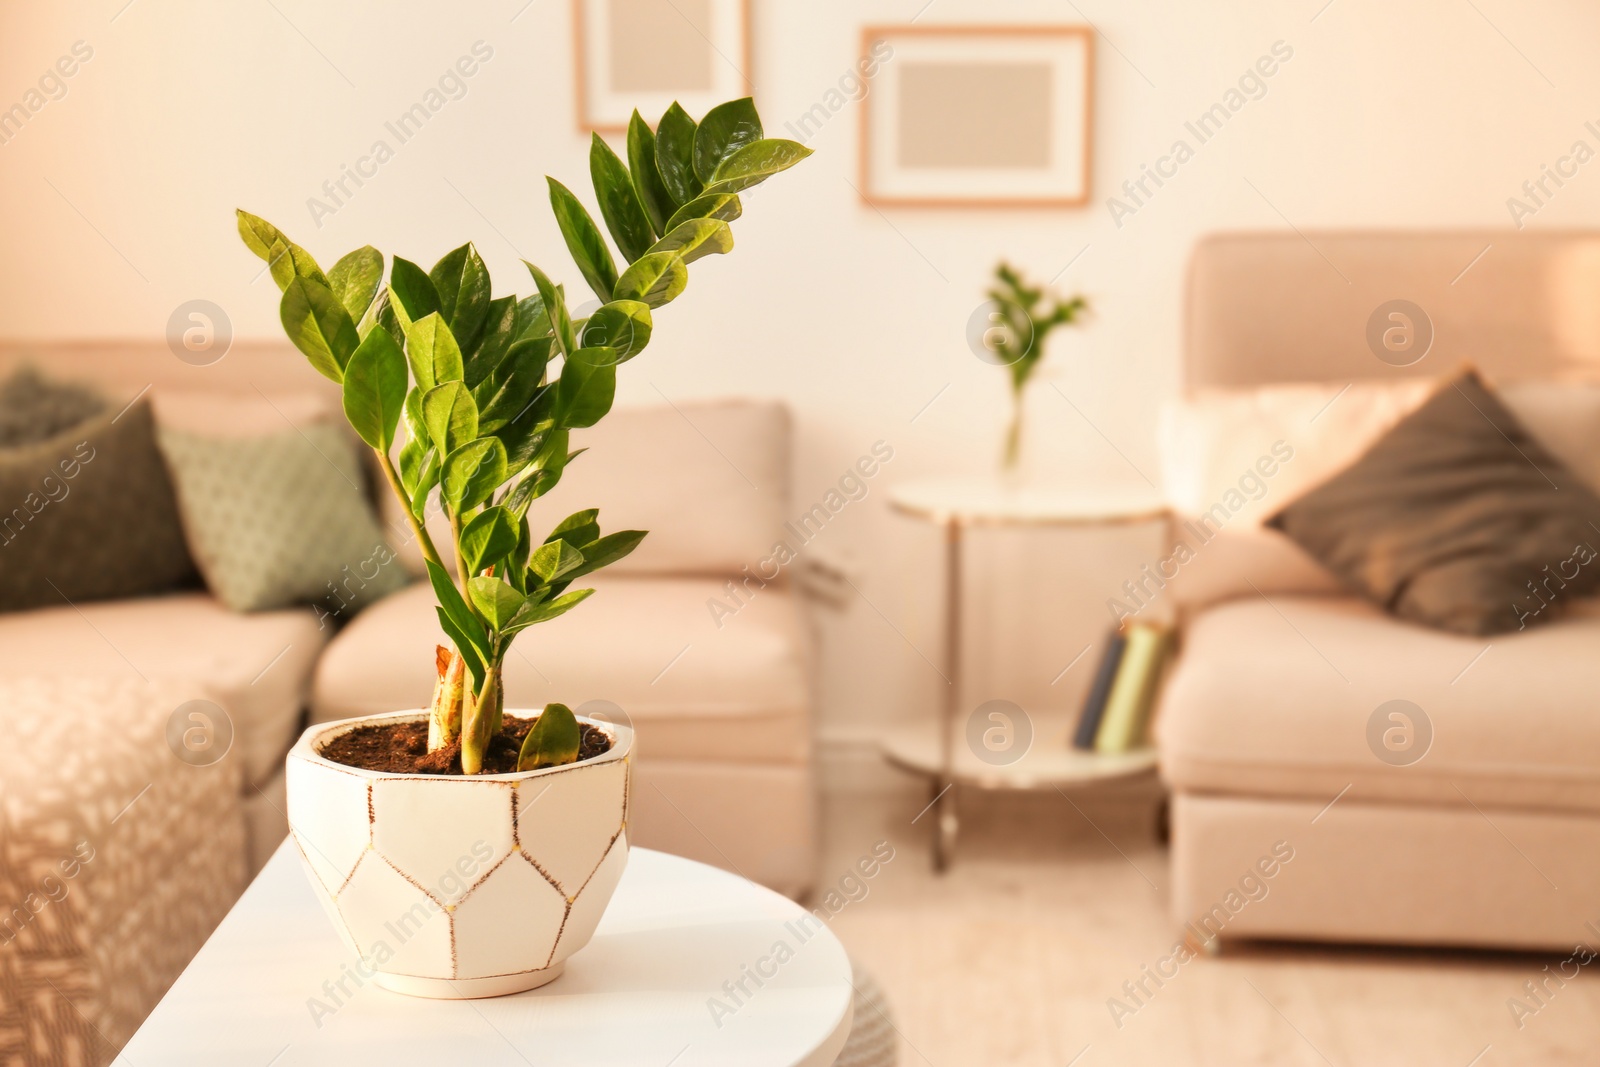 Photo of Tropical plant with green leaves in home interior